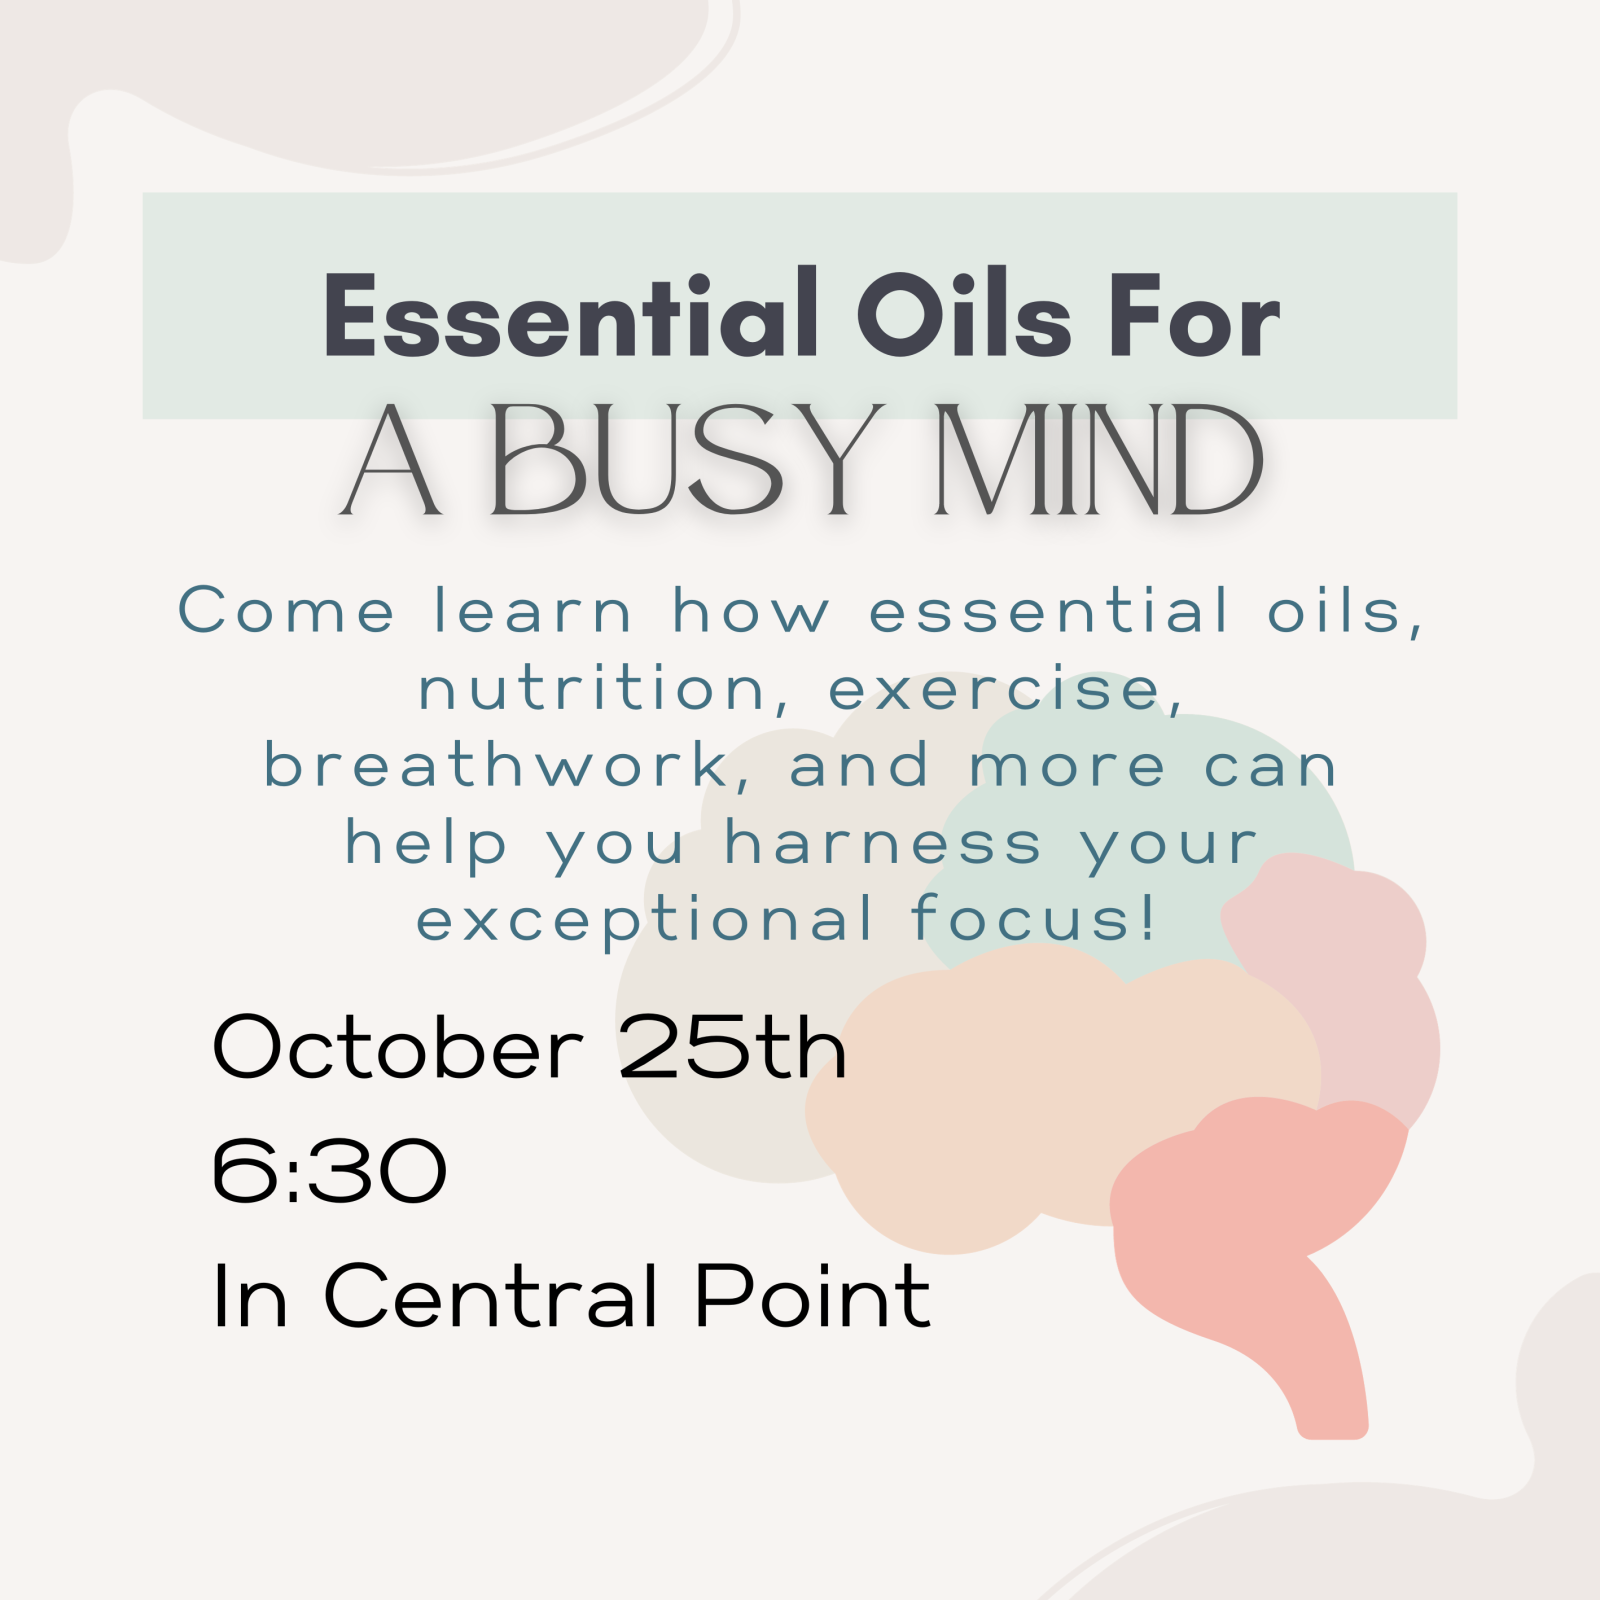 Oils for the Busy Mind